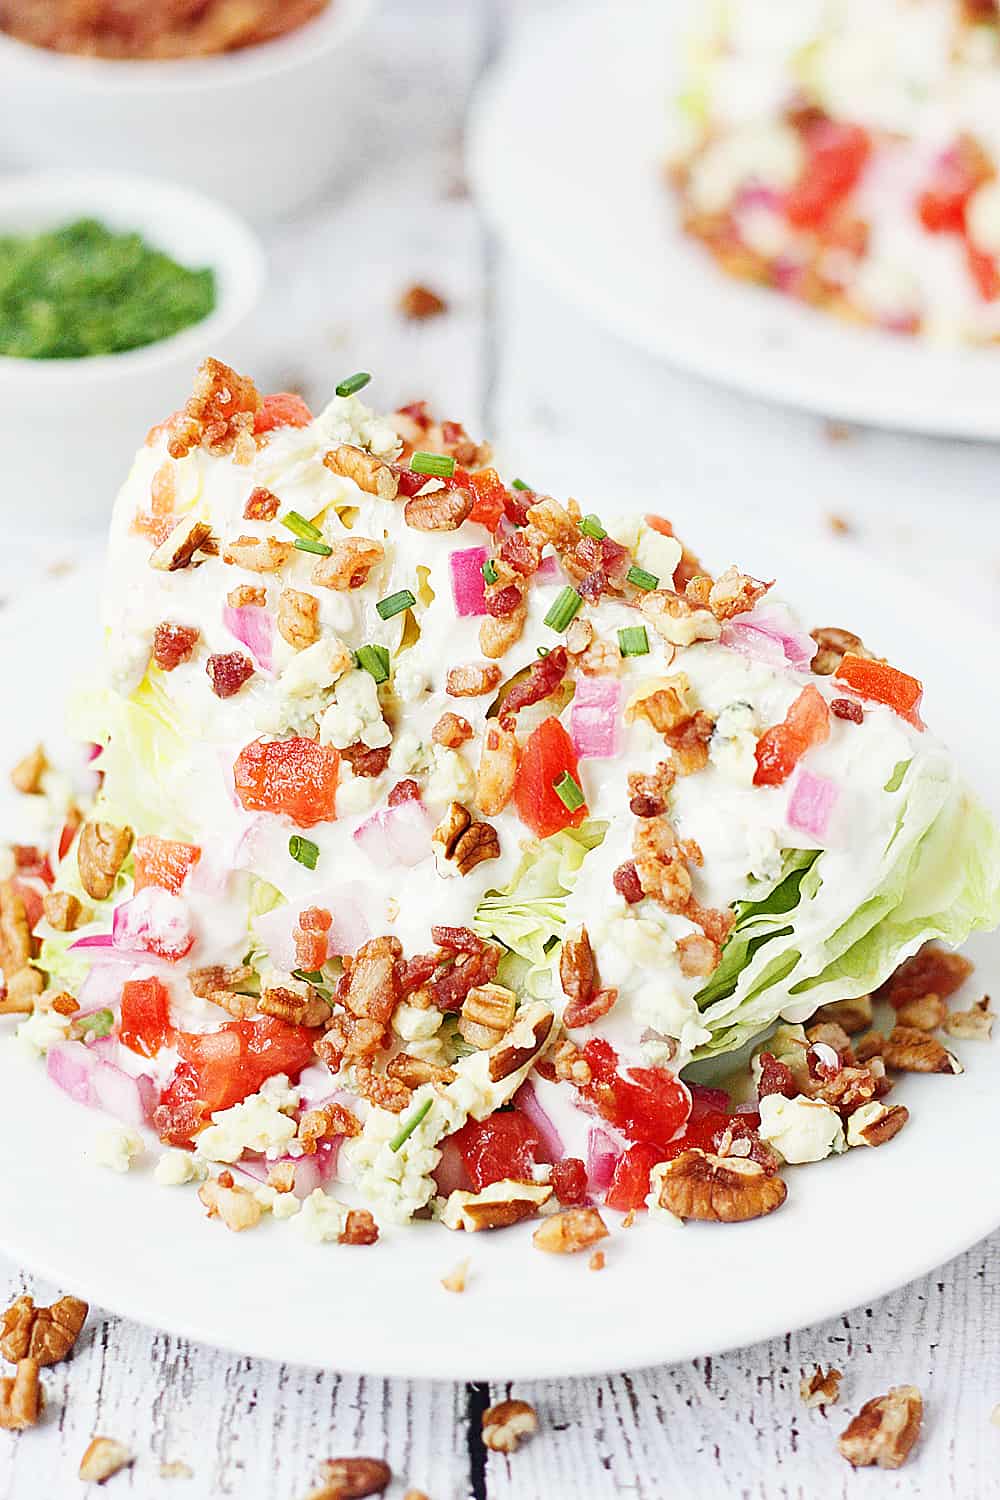 Loaded Wedge Salad -- This loaded wedge salad features iceberg lettuce topped with blue cheese dressing, red onion, tomatoes, bacon, blue cheese crumbles, and pecans. It's easier to make than you think! | halfscratched #recipe #salad